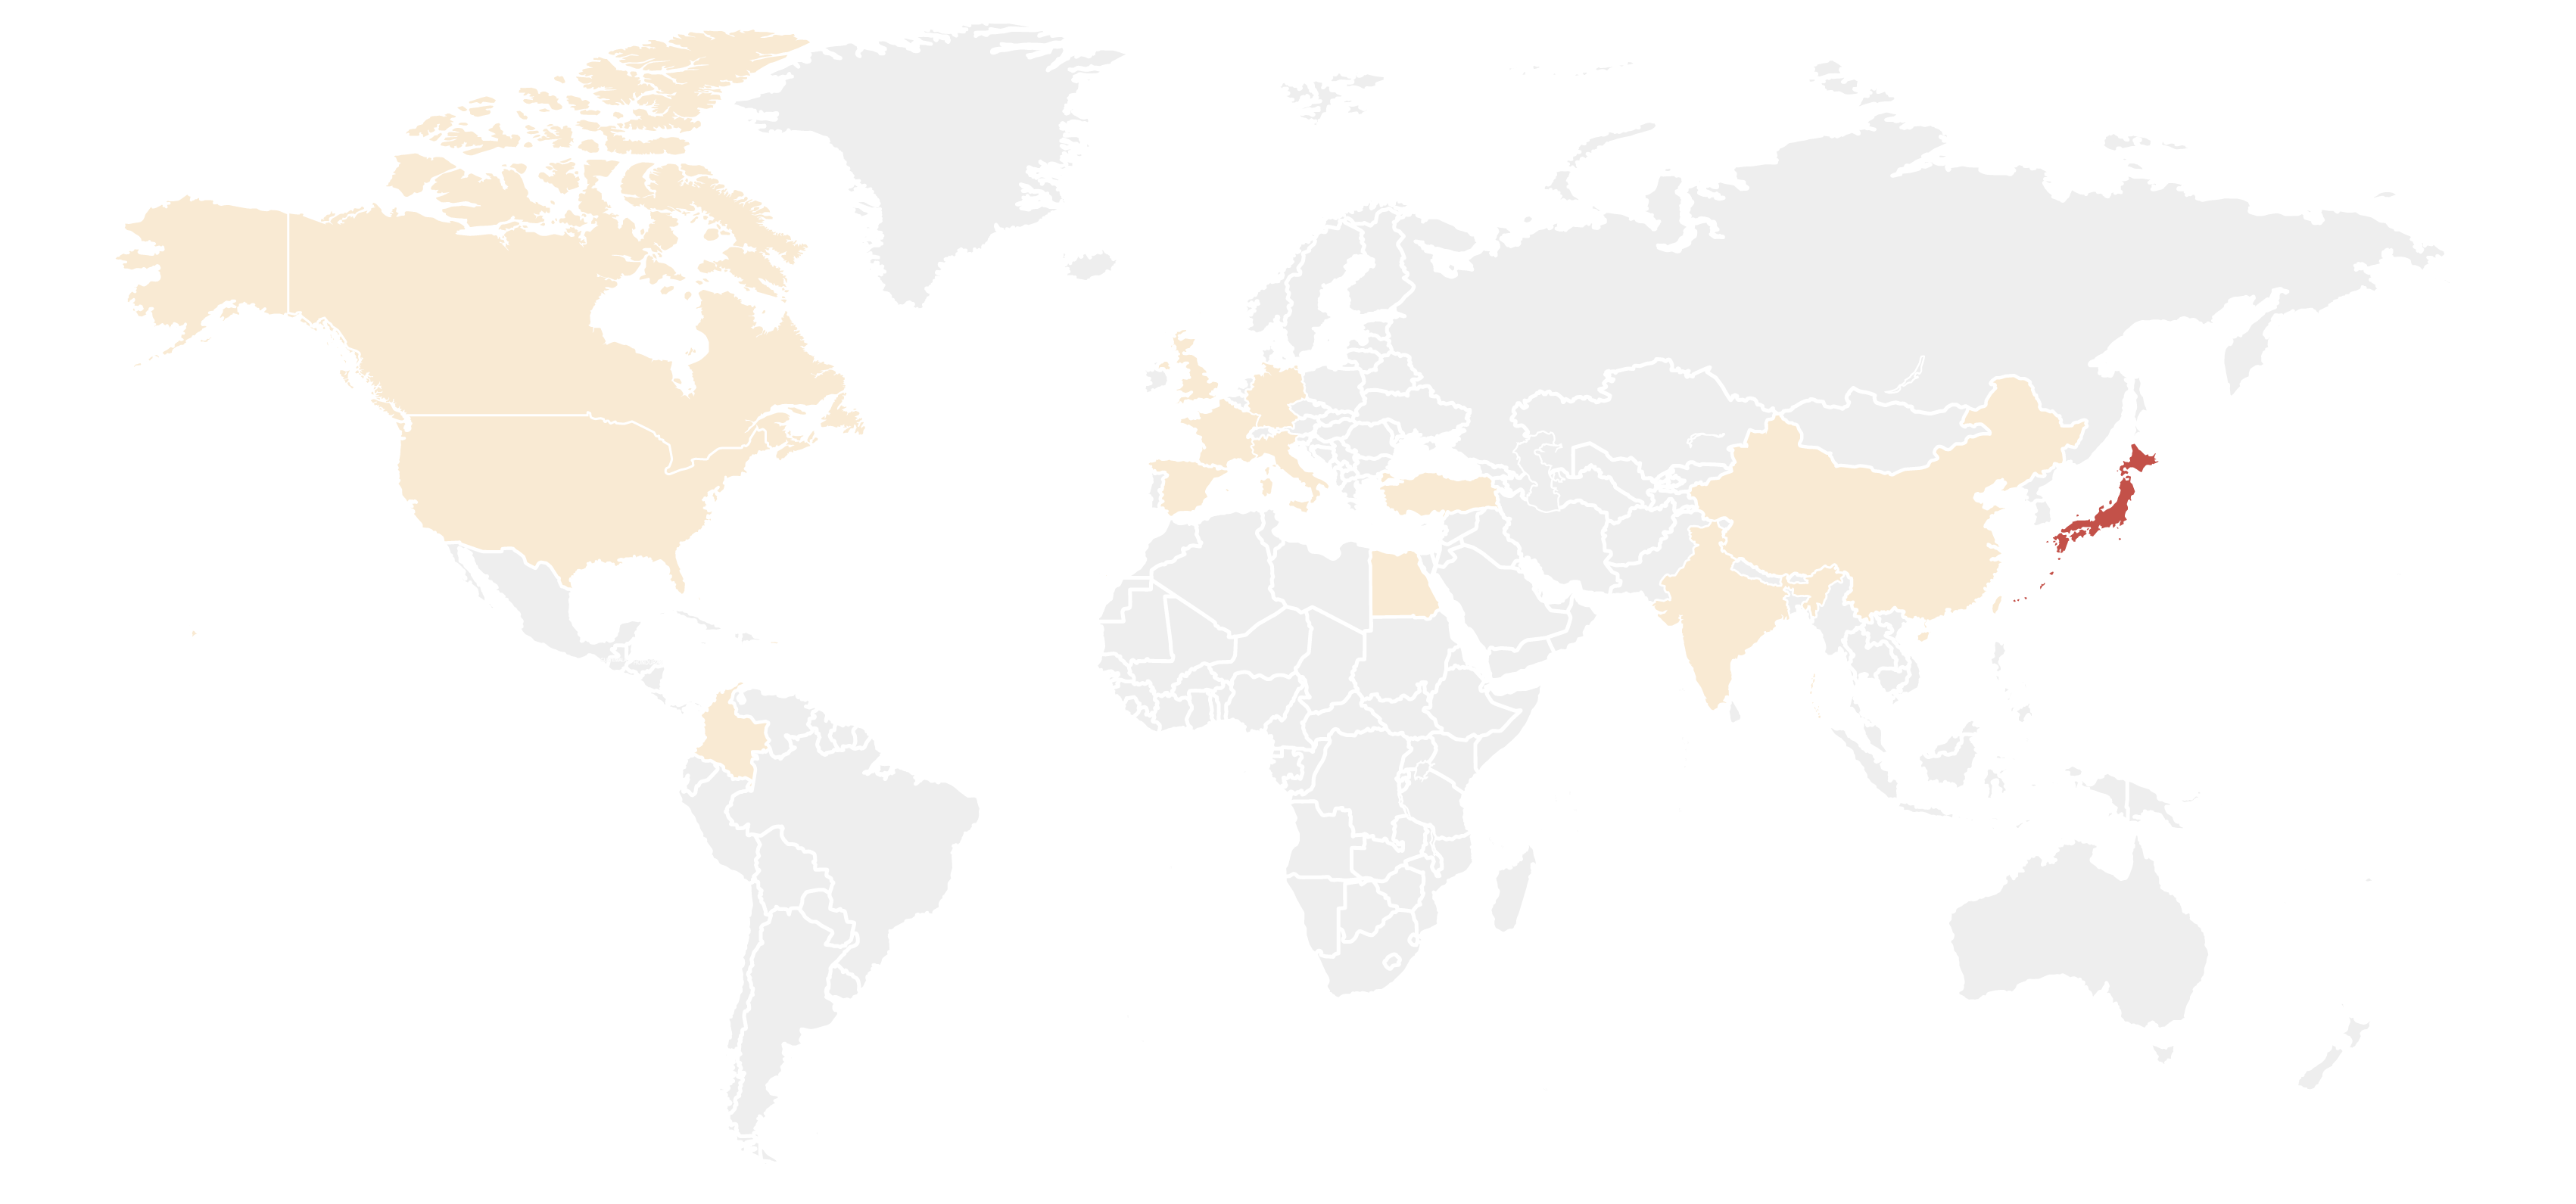 A map of the countries that participated in a survey about ITP symptoms,
how ITP affects people’s daily lives, and treatment